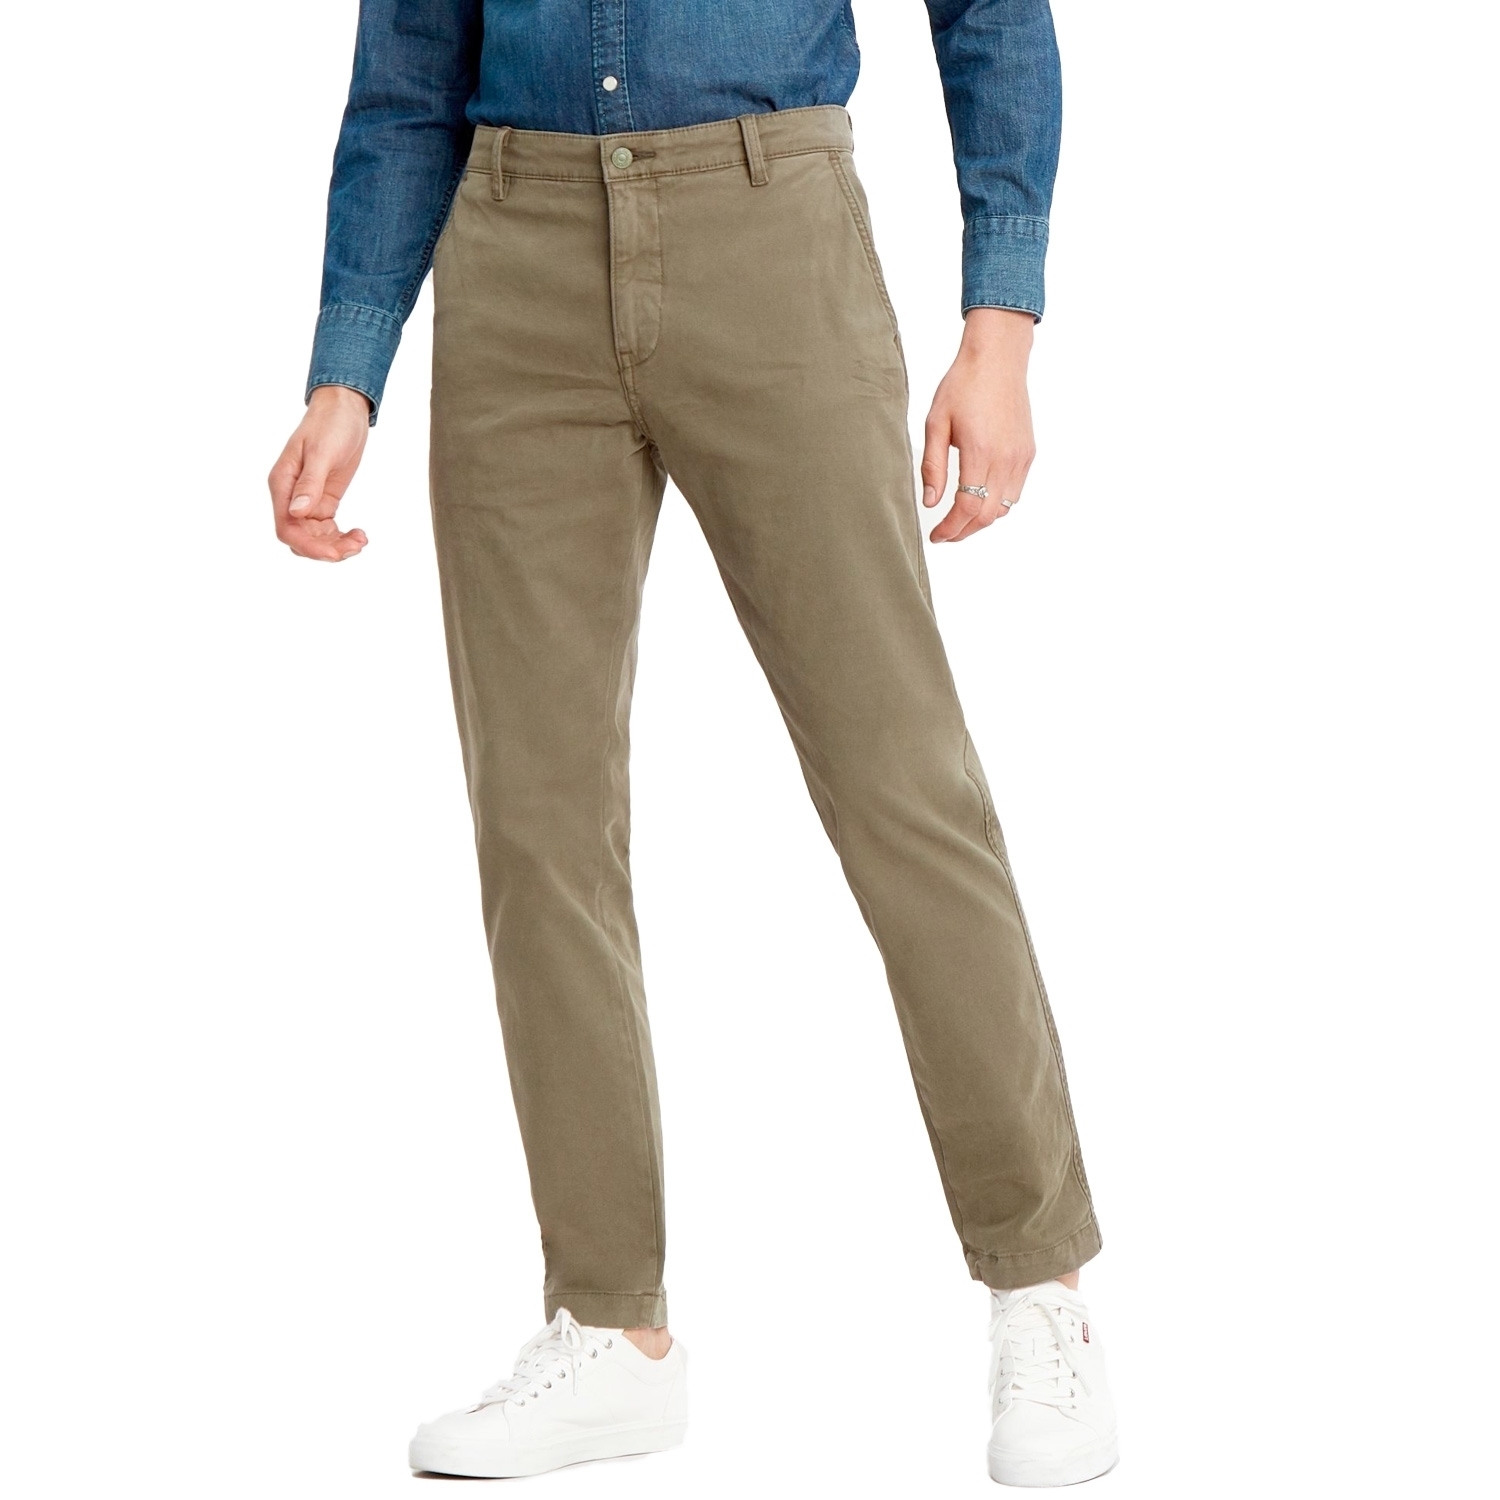 Levis Chino Trousers